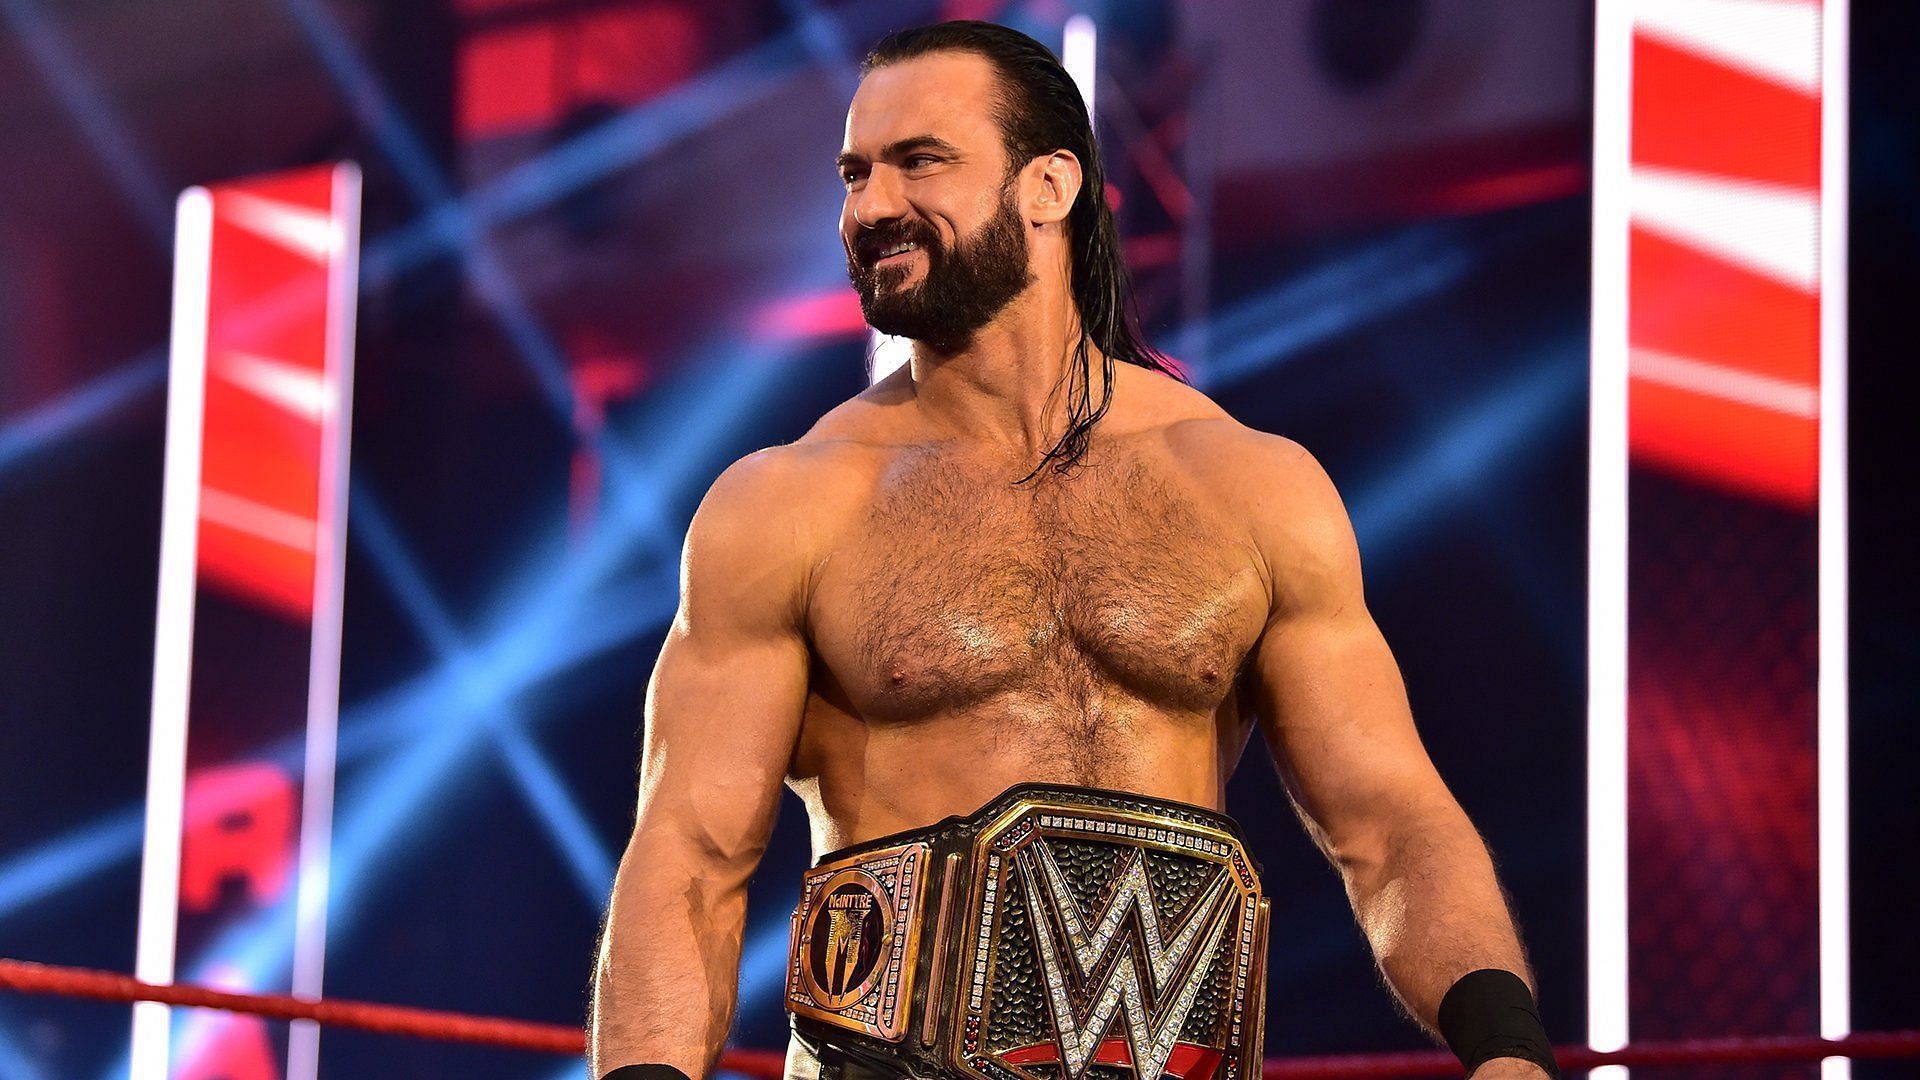 Drew McIntyre is excited to witness a match between Beth Phoenix and Rhea Ripley